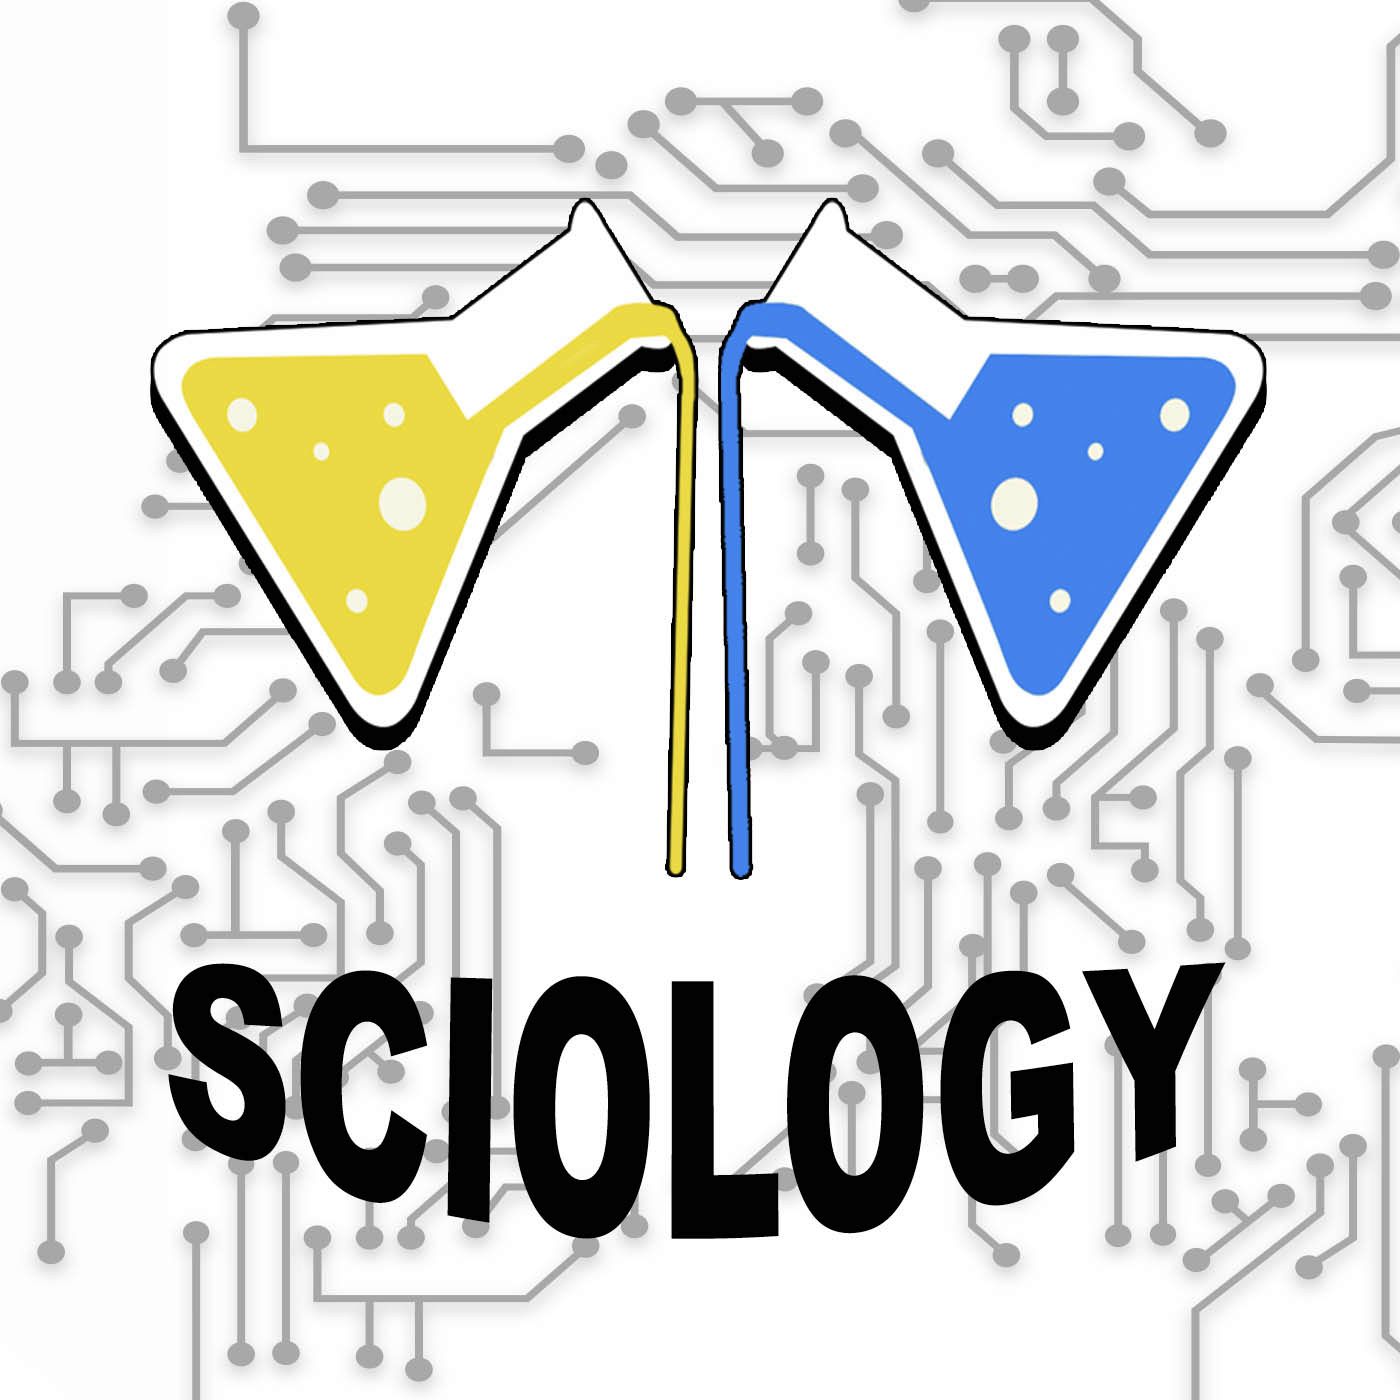 The Sciology Podcast